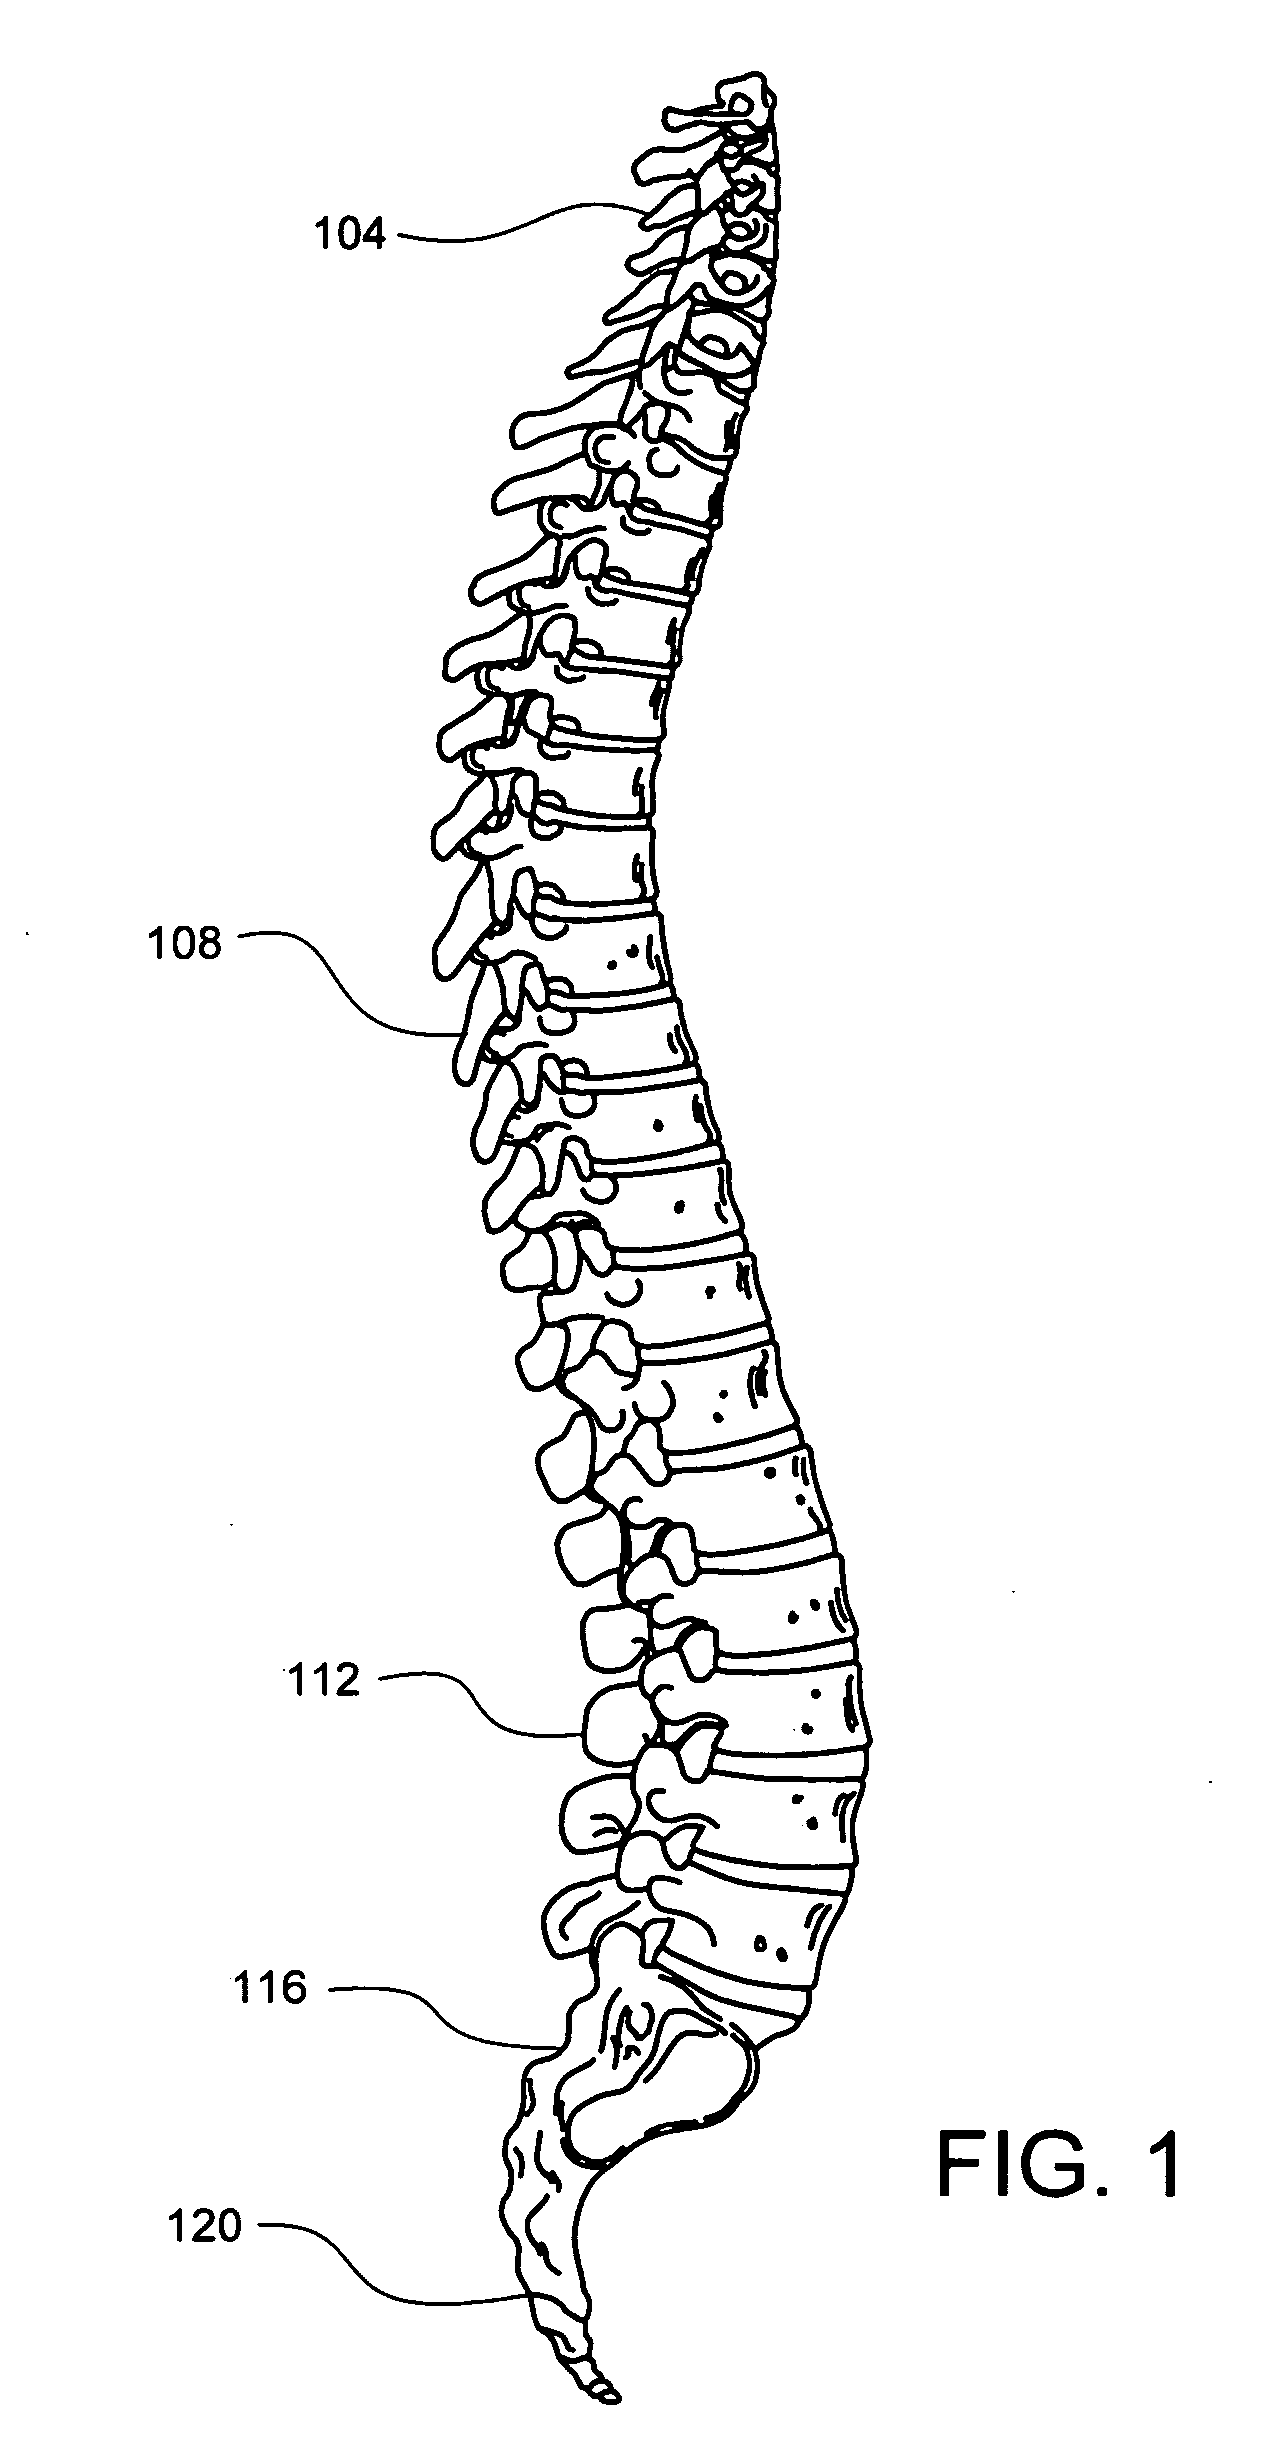 Driver assembly for simultaneous axial delivery of spinal implants